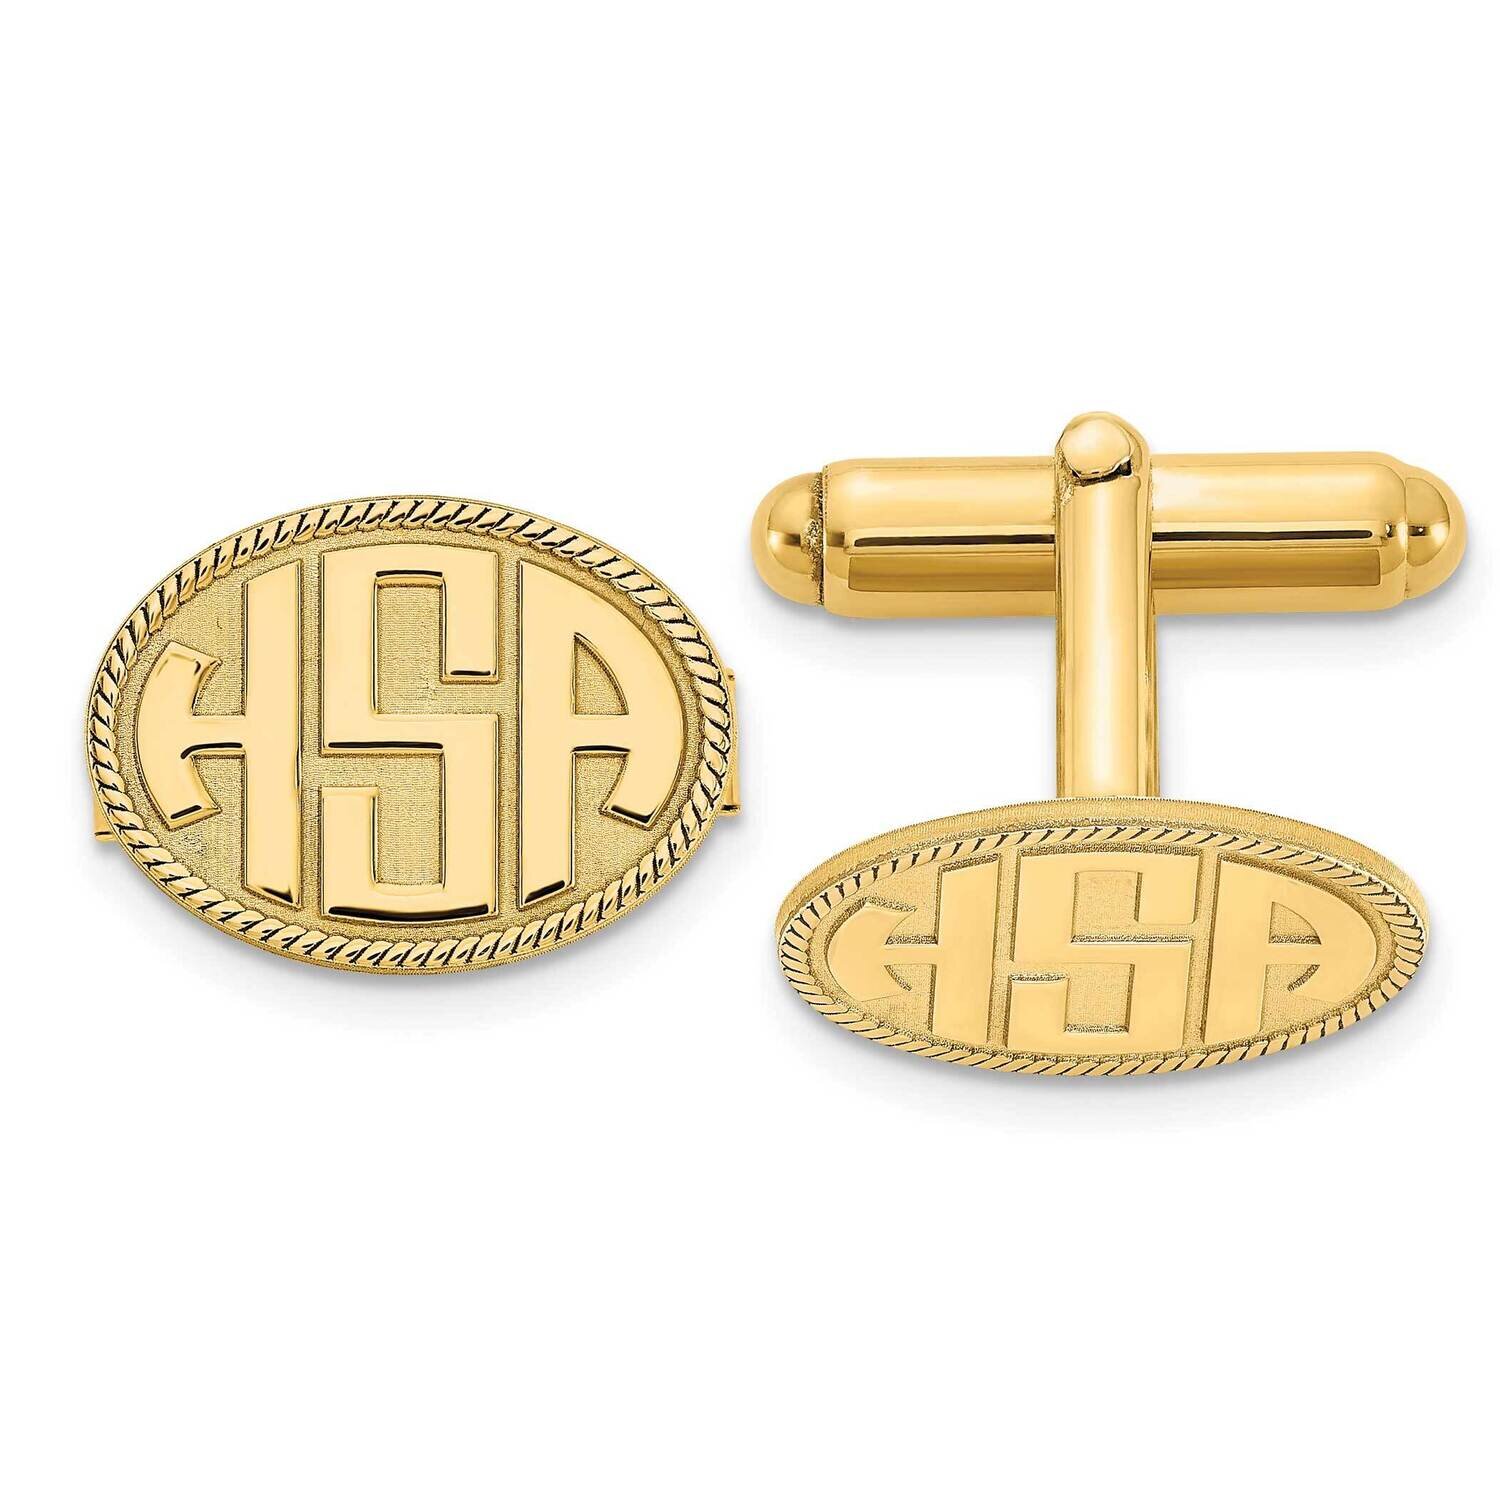 Oval with Boarder Raised Letters Monogram Cufflinks 14k Gold XNA623Y